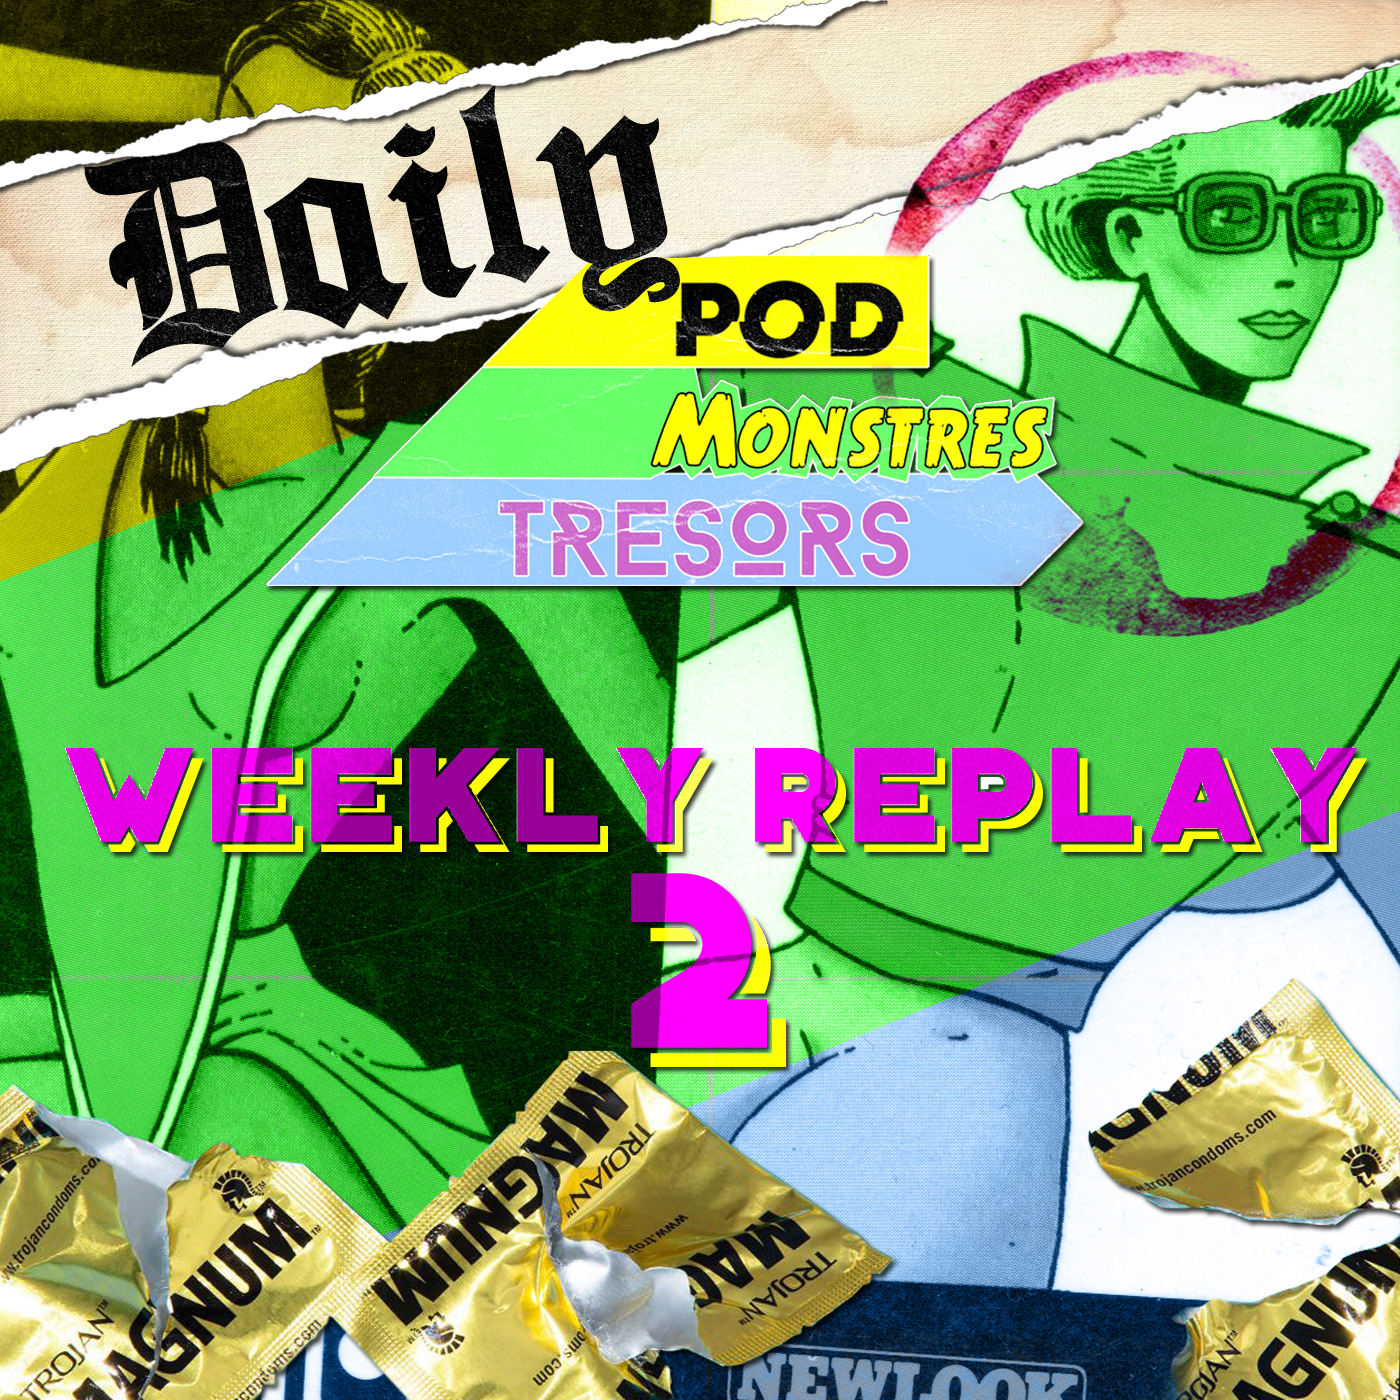 Daily Pod Monstres Trésors : Mexico Melody – Le Weekly Replay 2